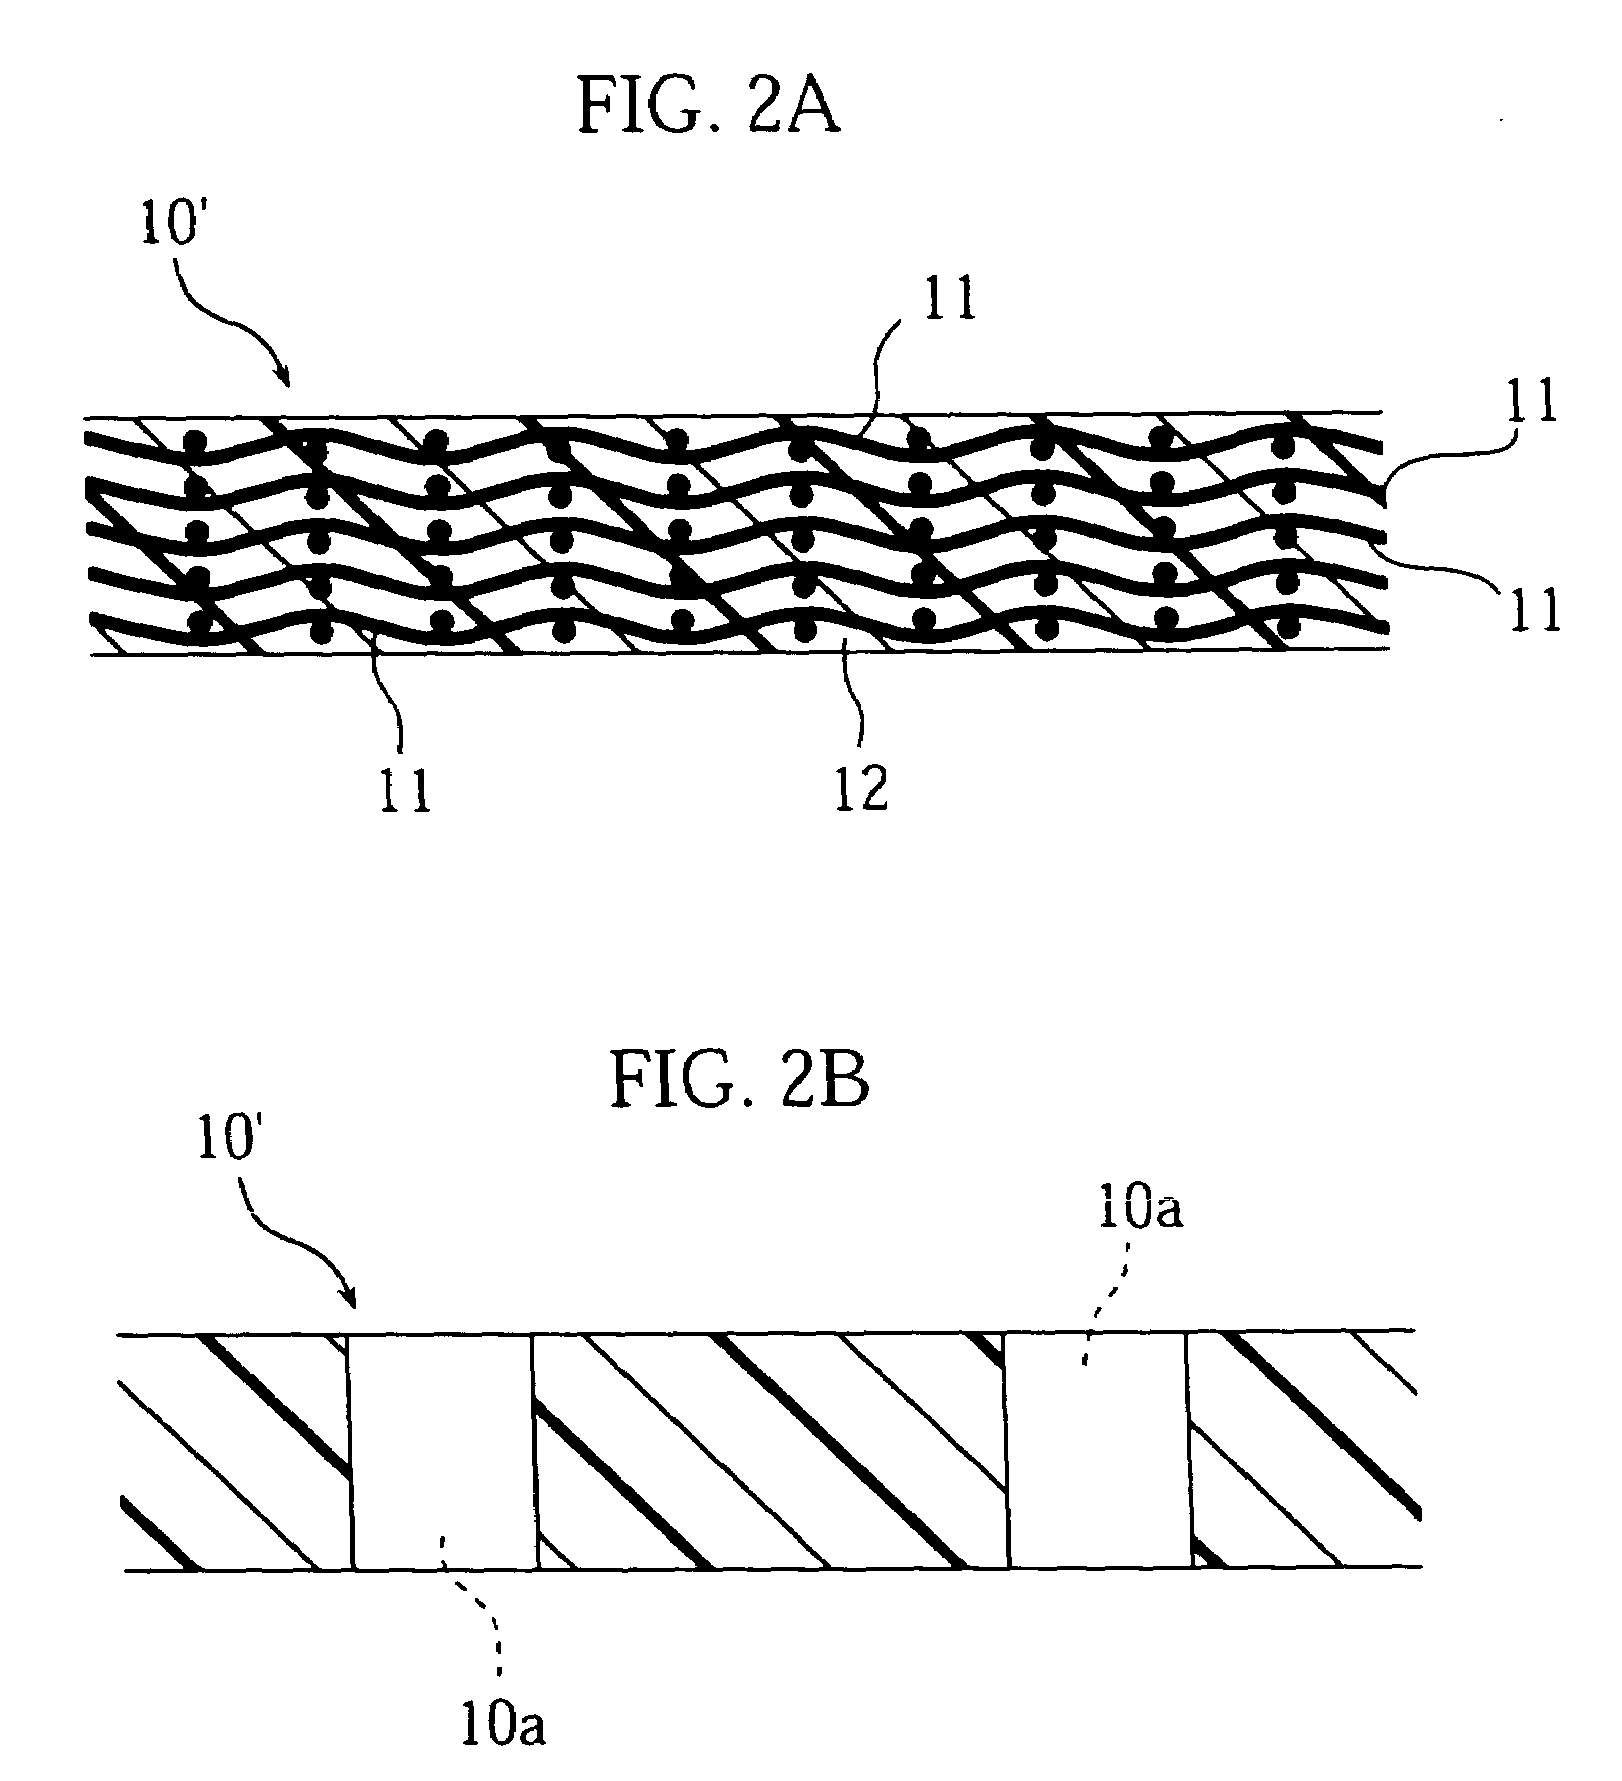 Multilayer wiring board incorporating carbon fibers and glass fibers